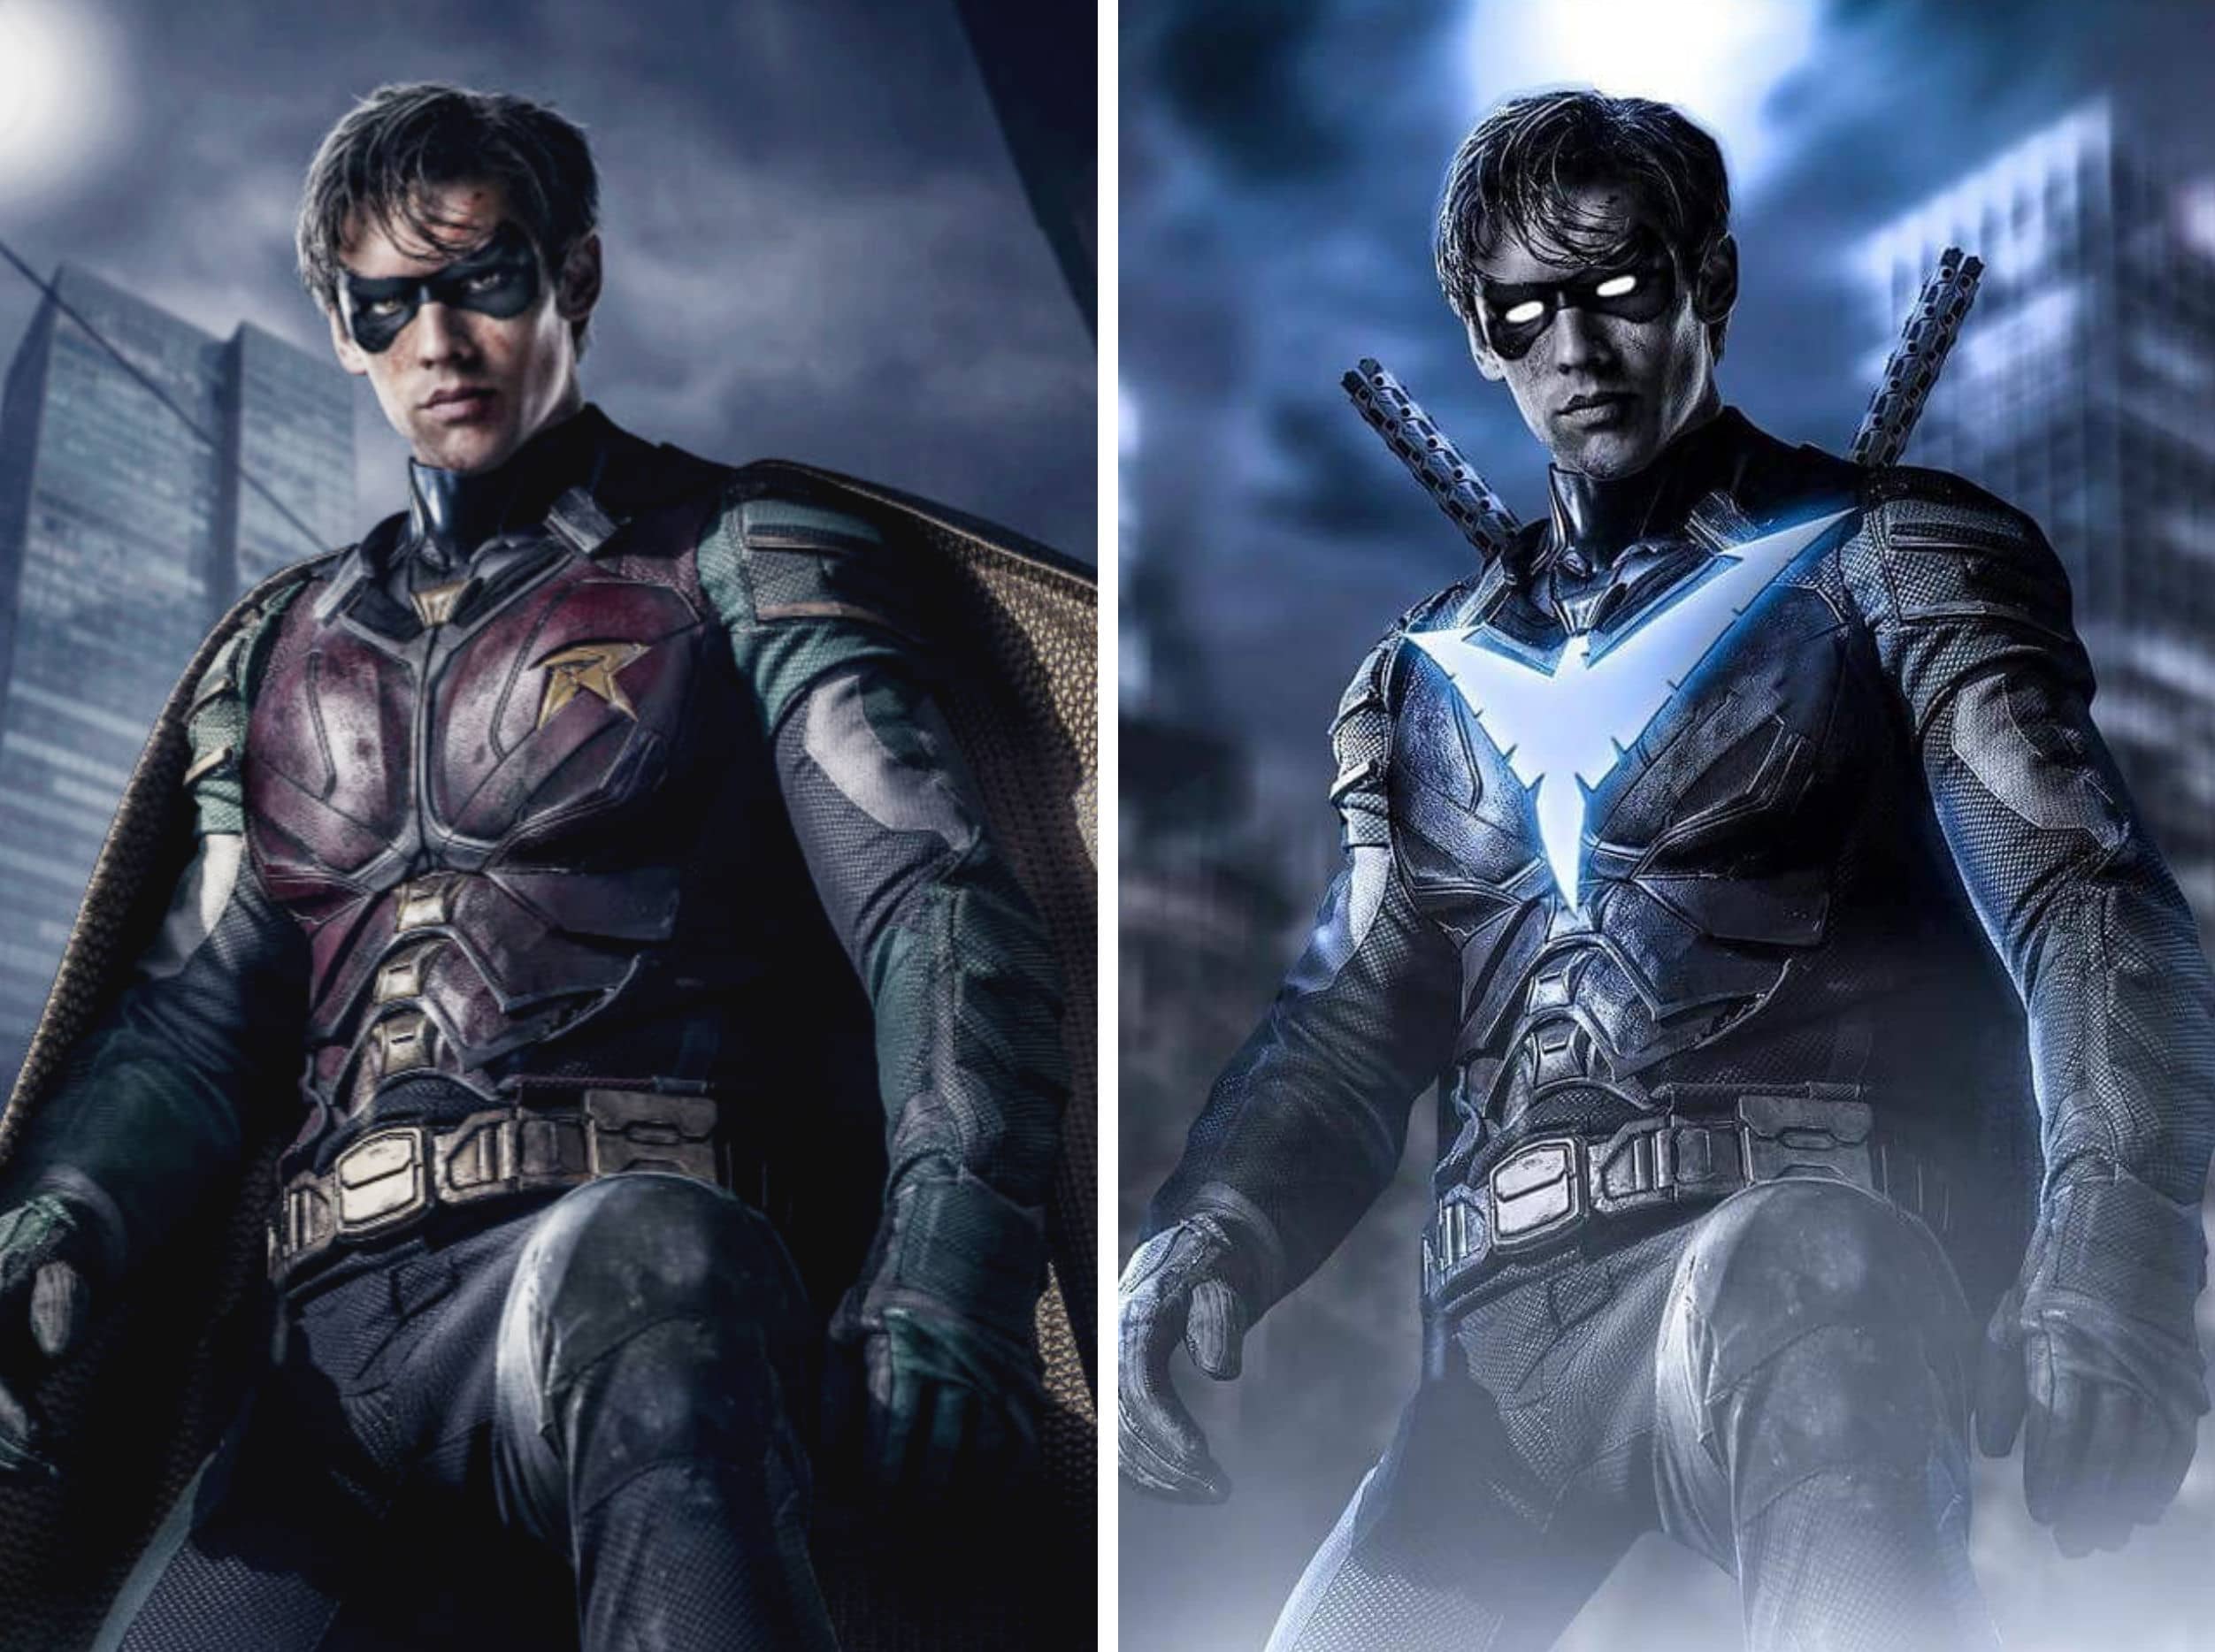 DC Universe’s Titans Confirms Nightwing Costume For Season 2